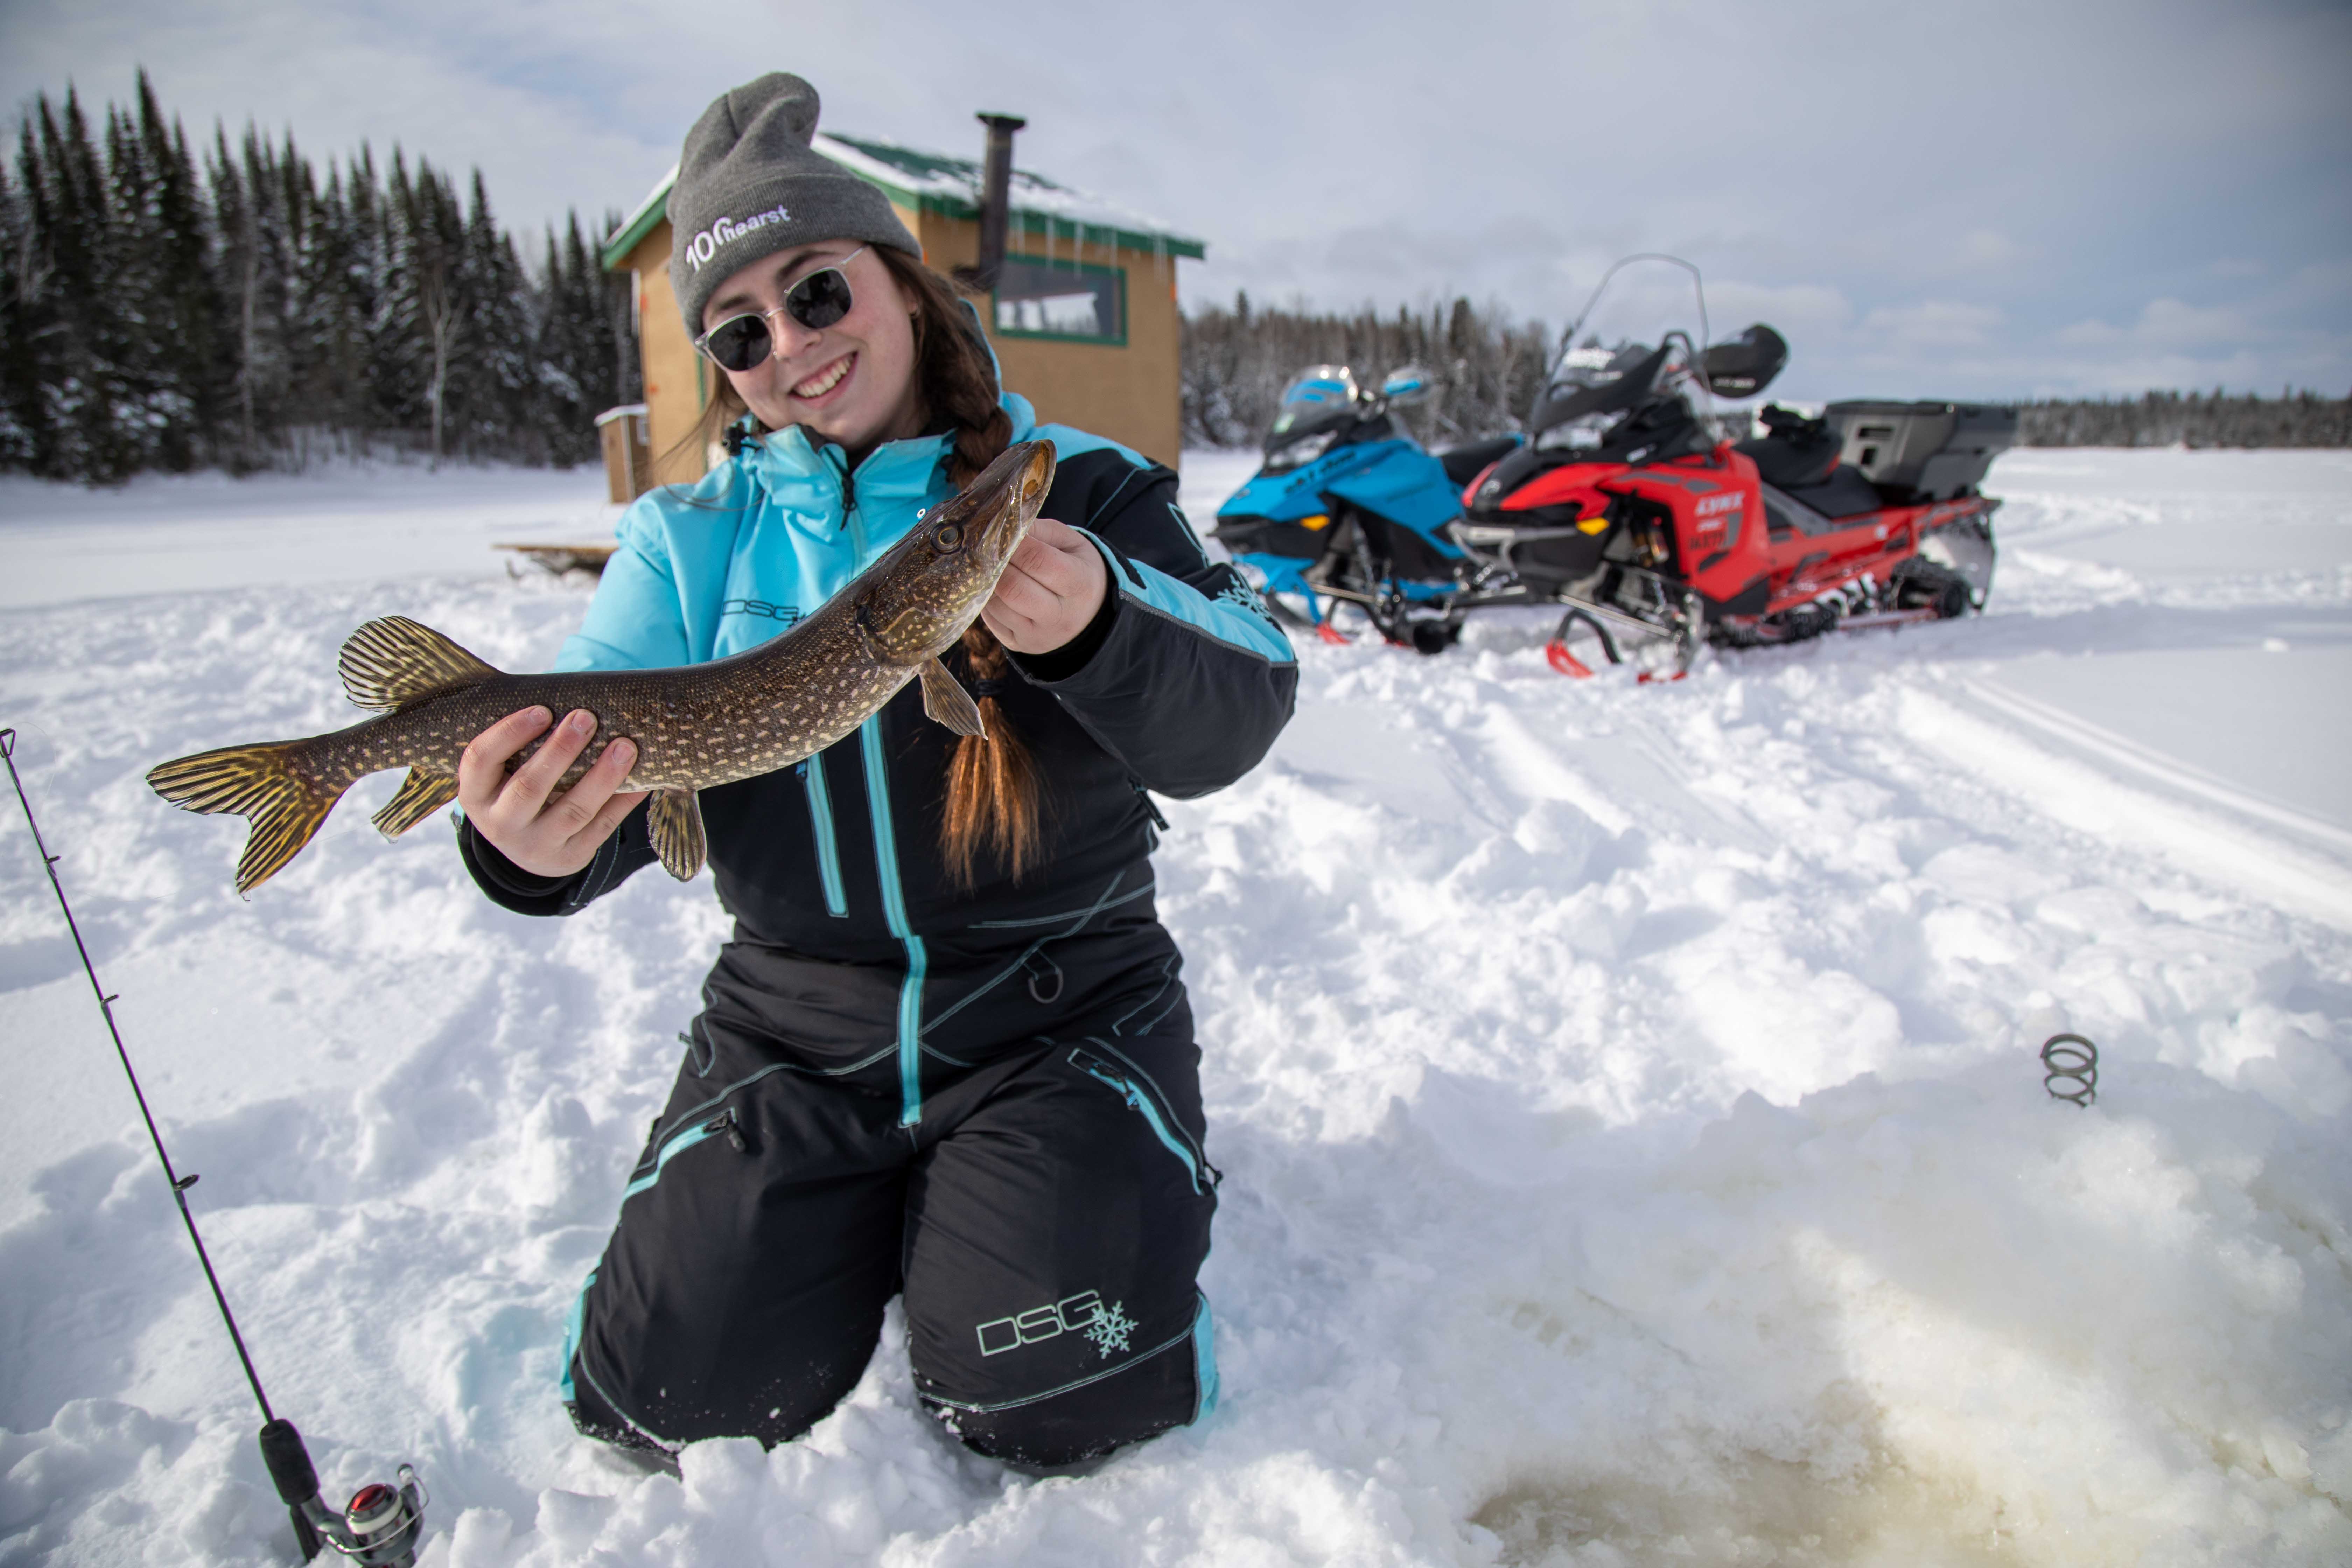 a smiling woman in snow gear kneeling next. to an ice fishing hole, holding a large fish. 2 snowmobiles are parked in the background.